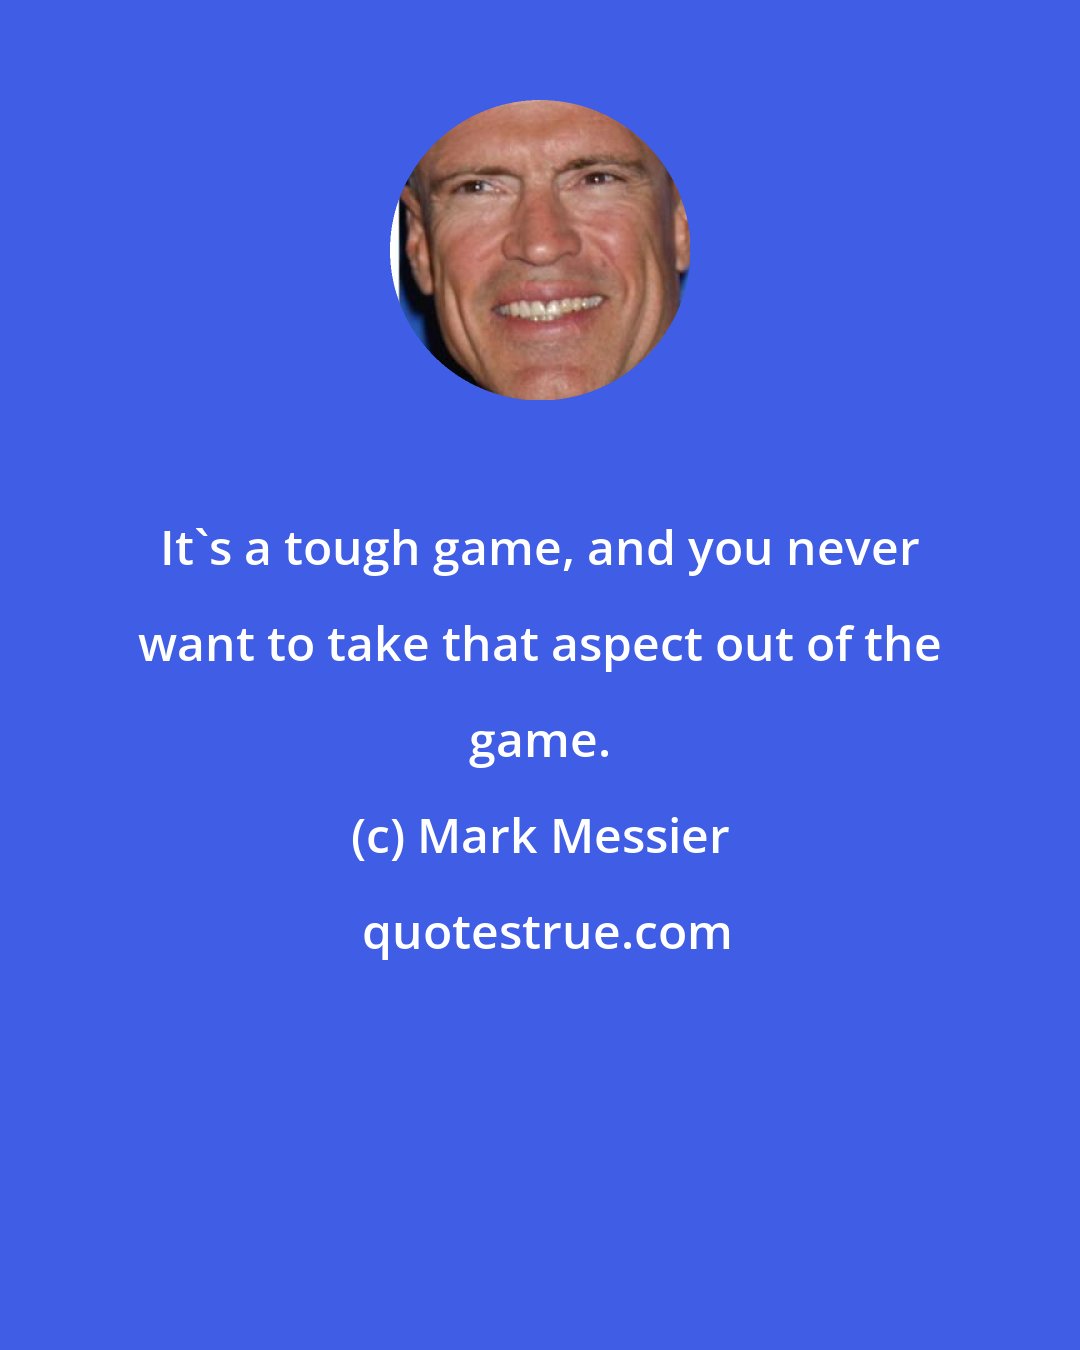 Mark Messier: It's a tough game, and you never want to take that aspect out of the game.